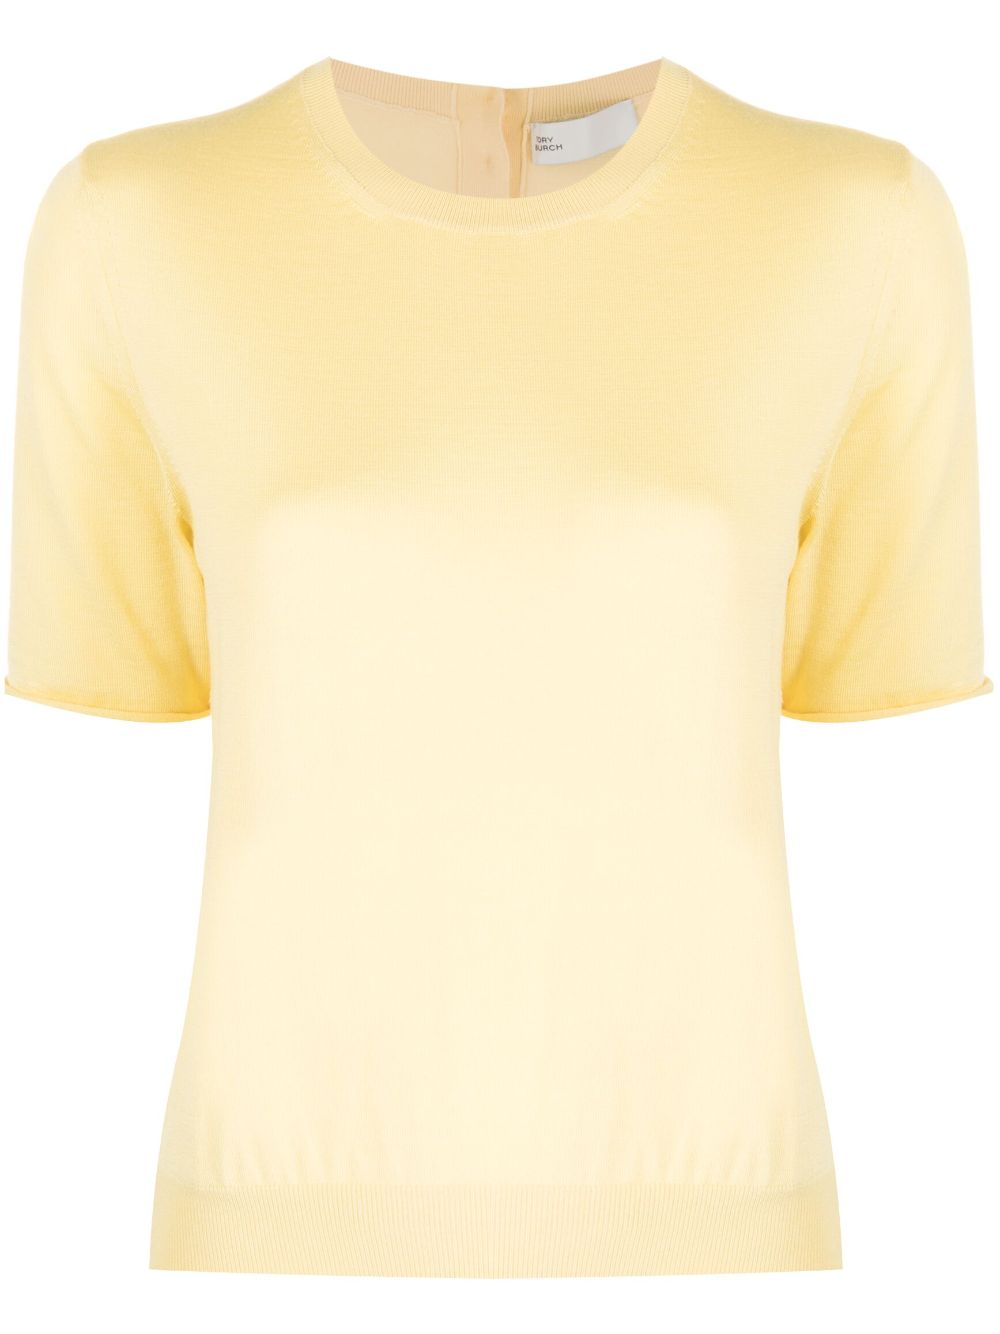 Tory Burch Short-sleeve Knitted Top In Gelb